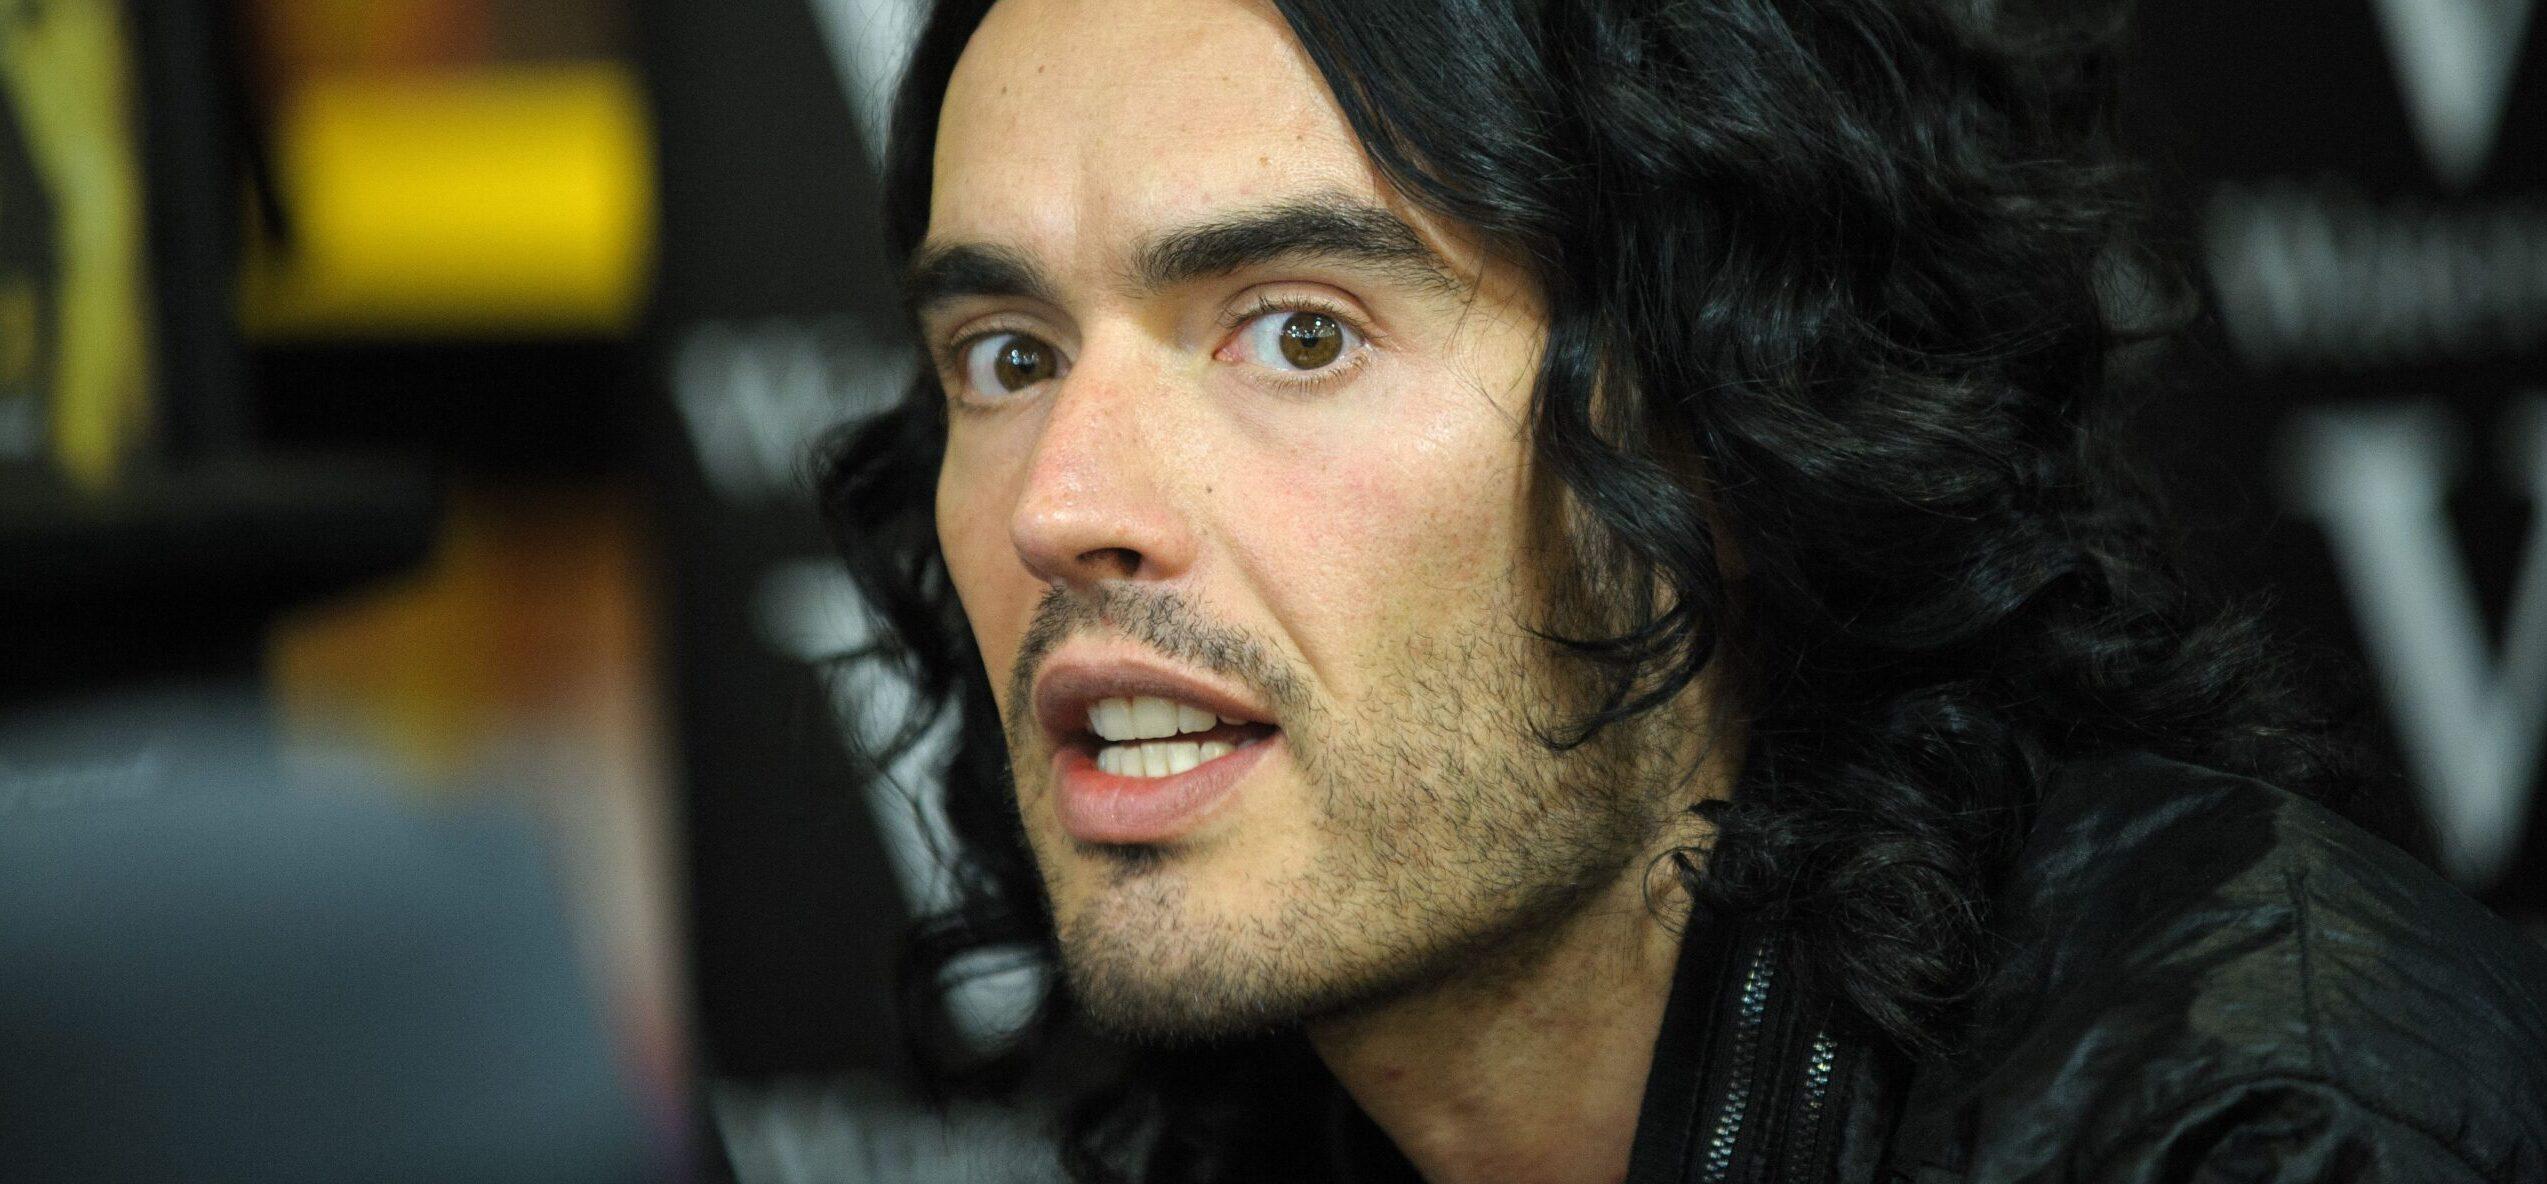 Russell Brand Faces Disciplinary Action From YouTube For Violating Their ‘Responsibility Policy’